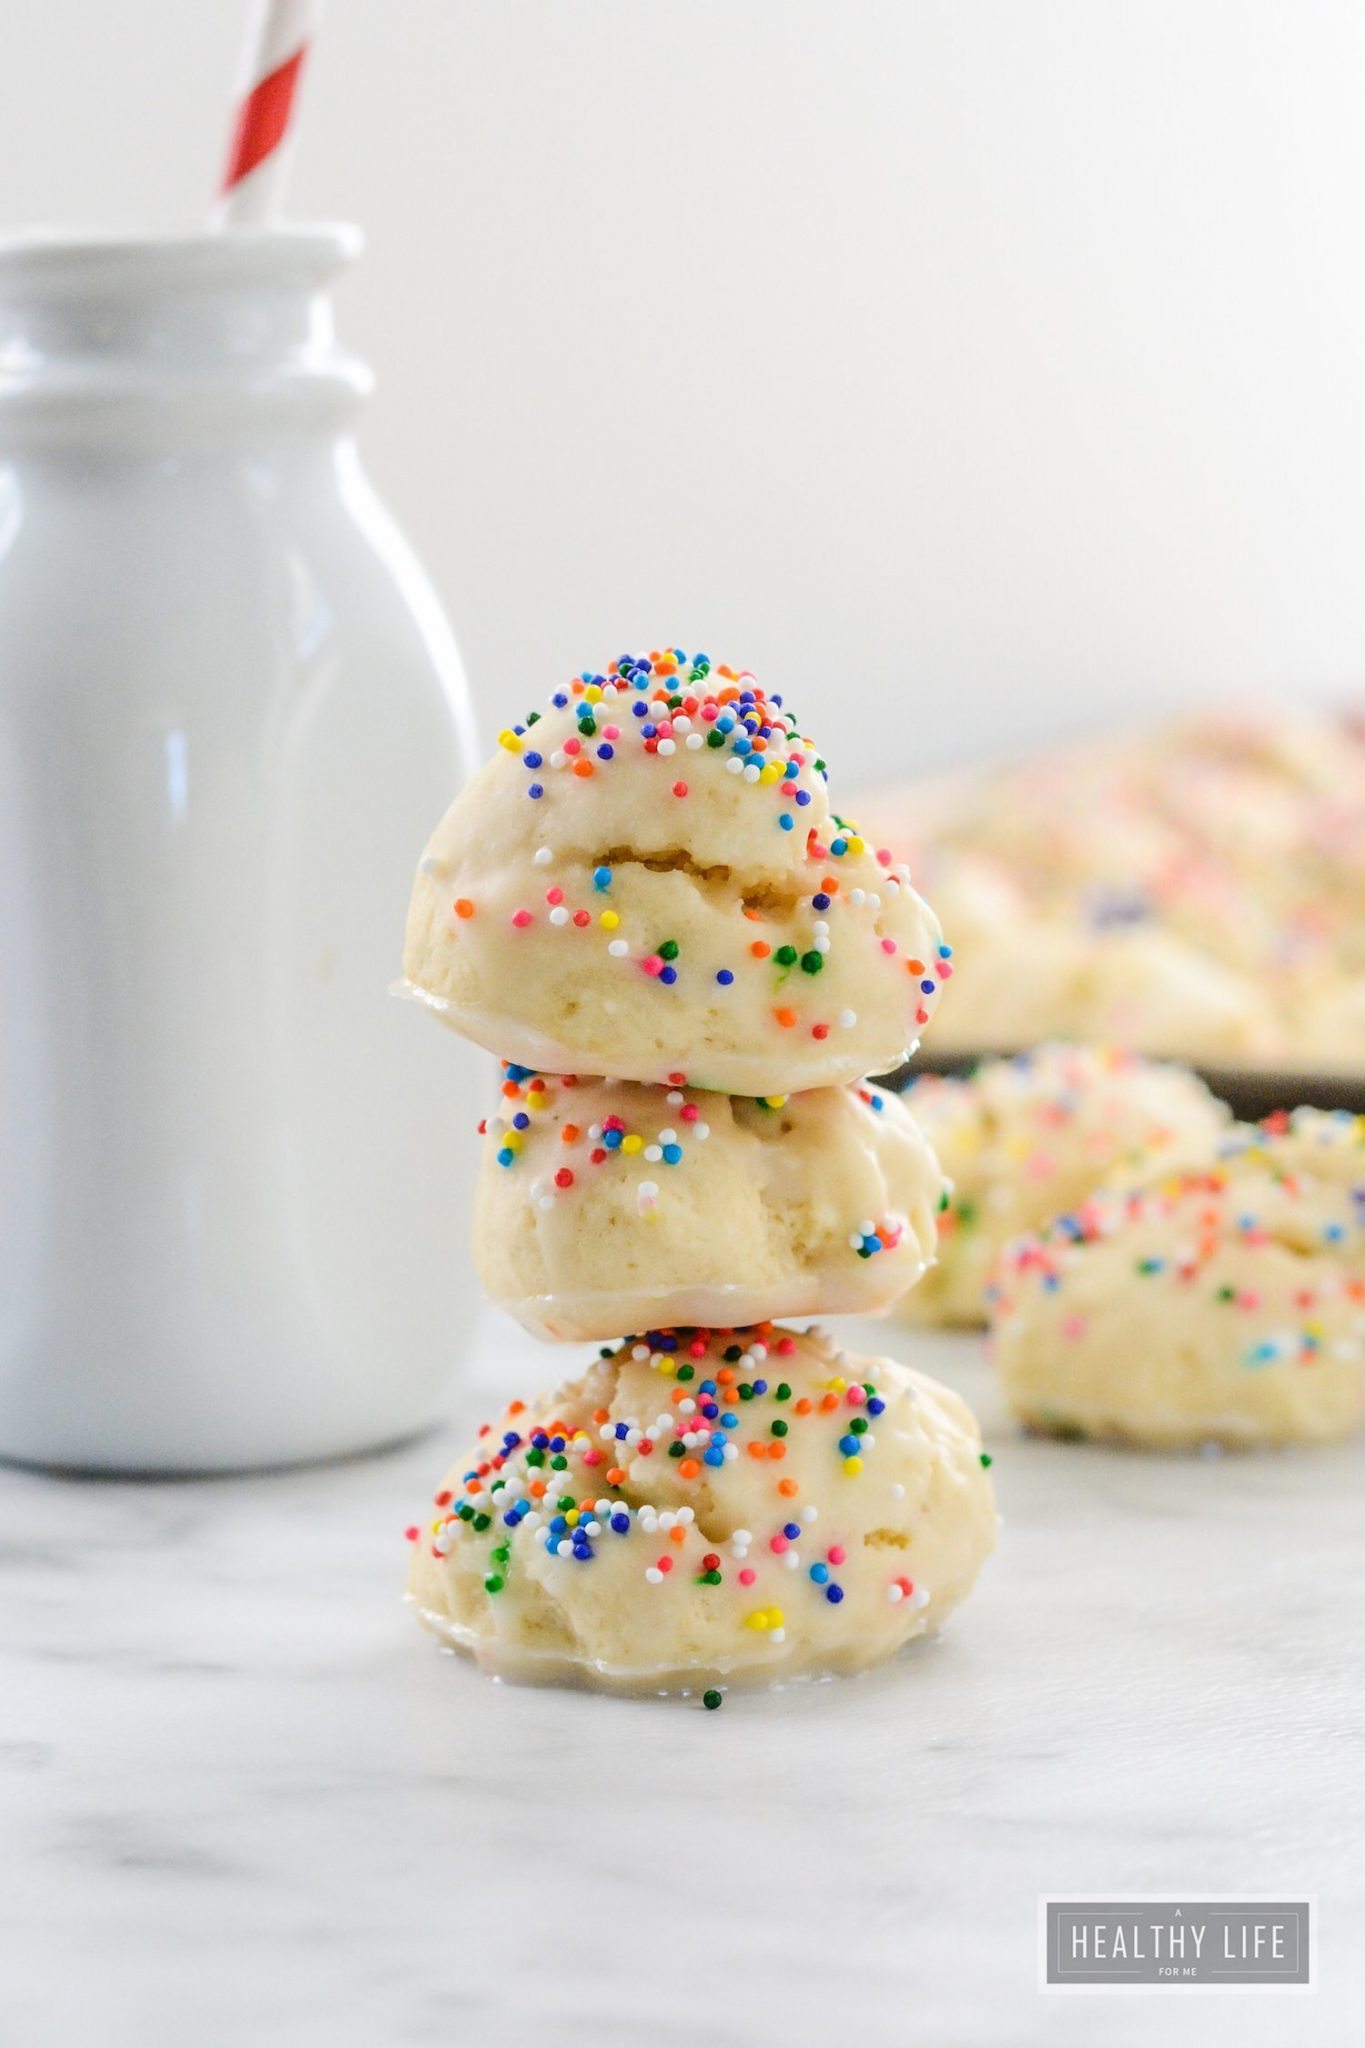 A couple of stacked anisette cookies with a jug of milk in the background.